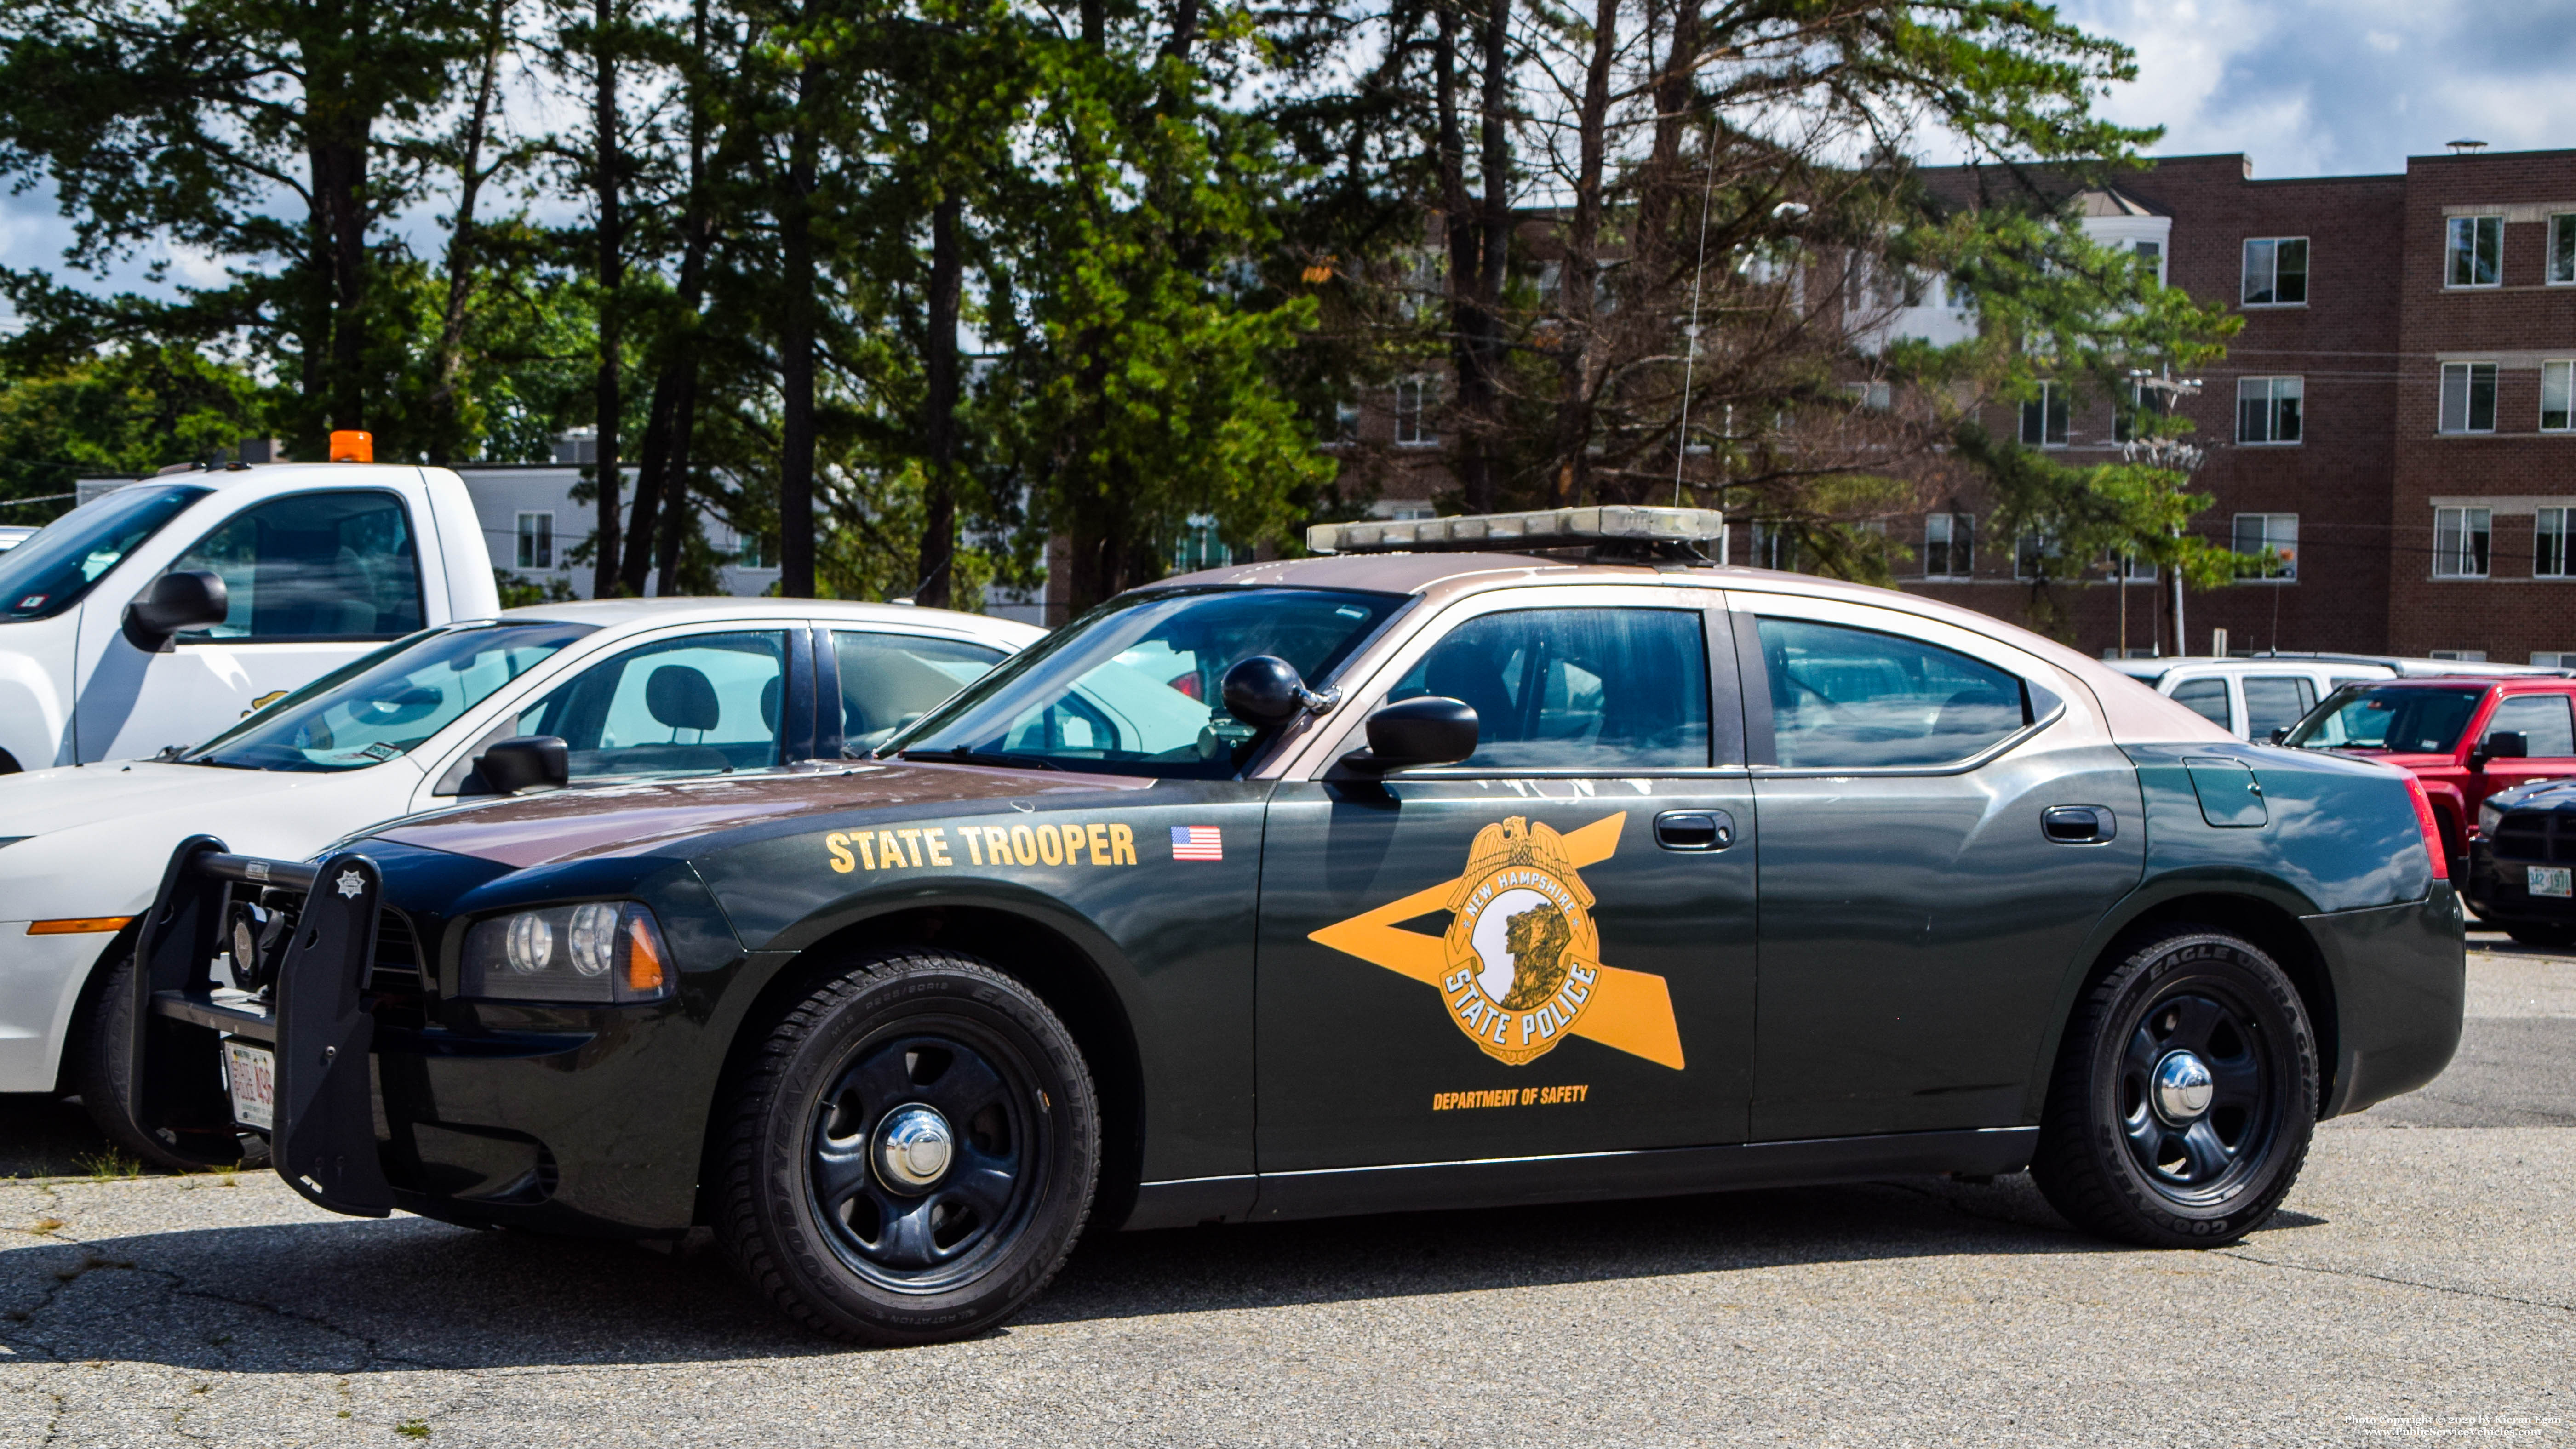 A photo  of New Hampshire State Police
            Cruiser 496, a 2006-2010 Dodge Charger             taken by Kieran Egan